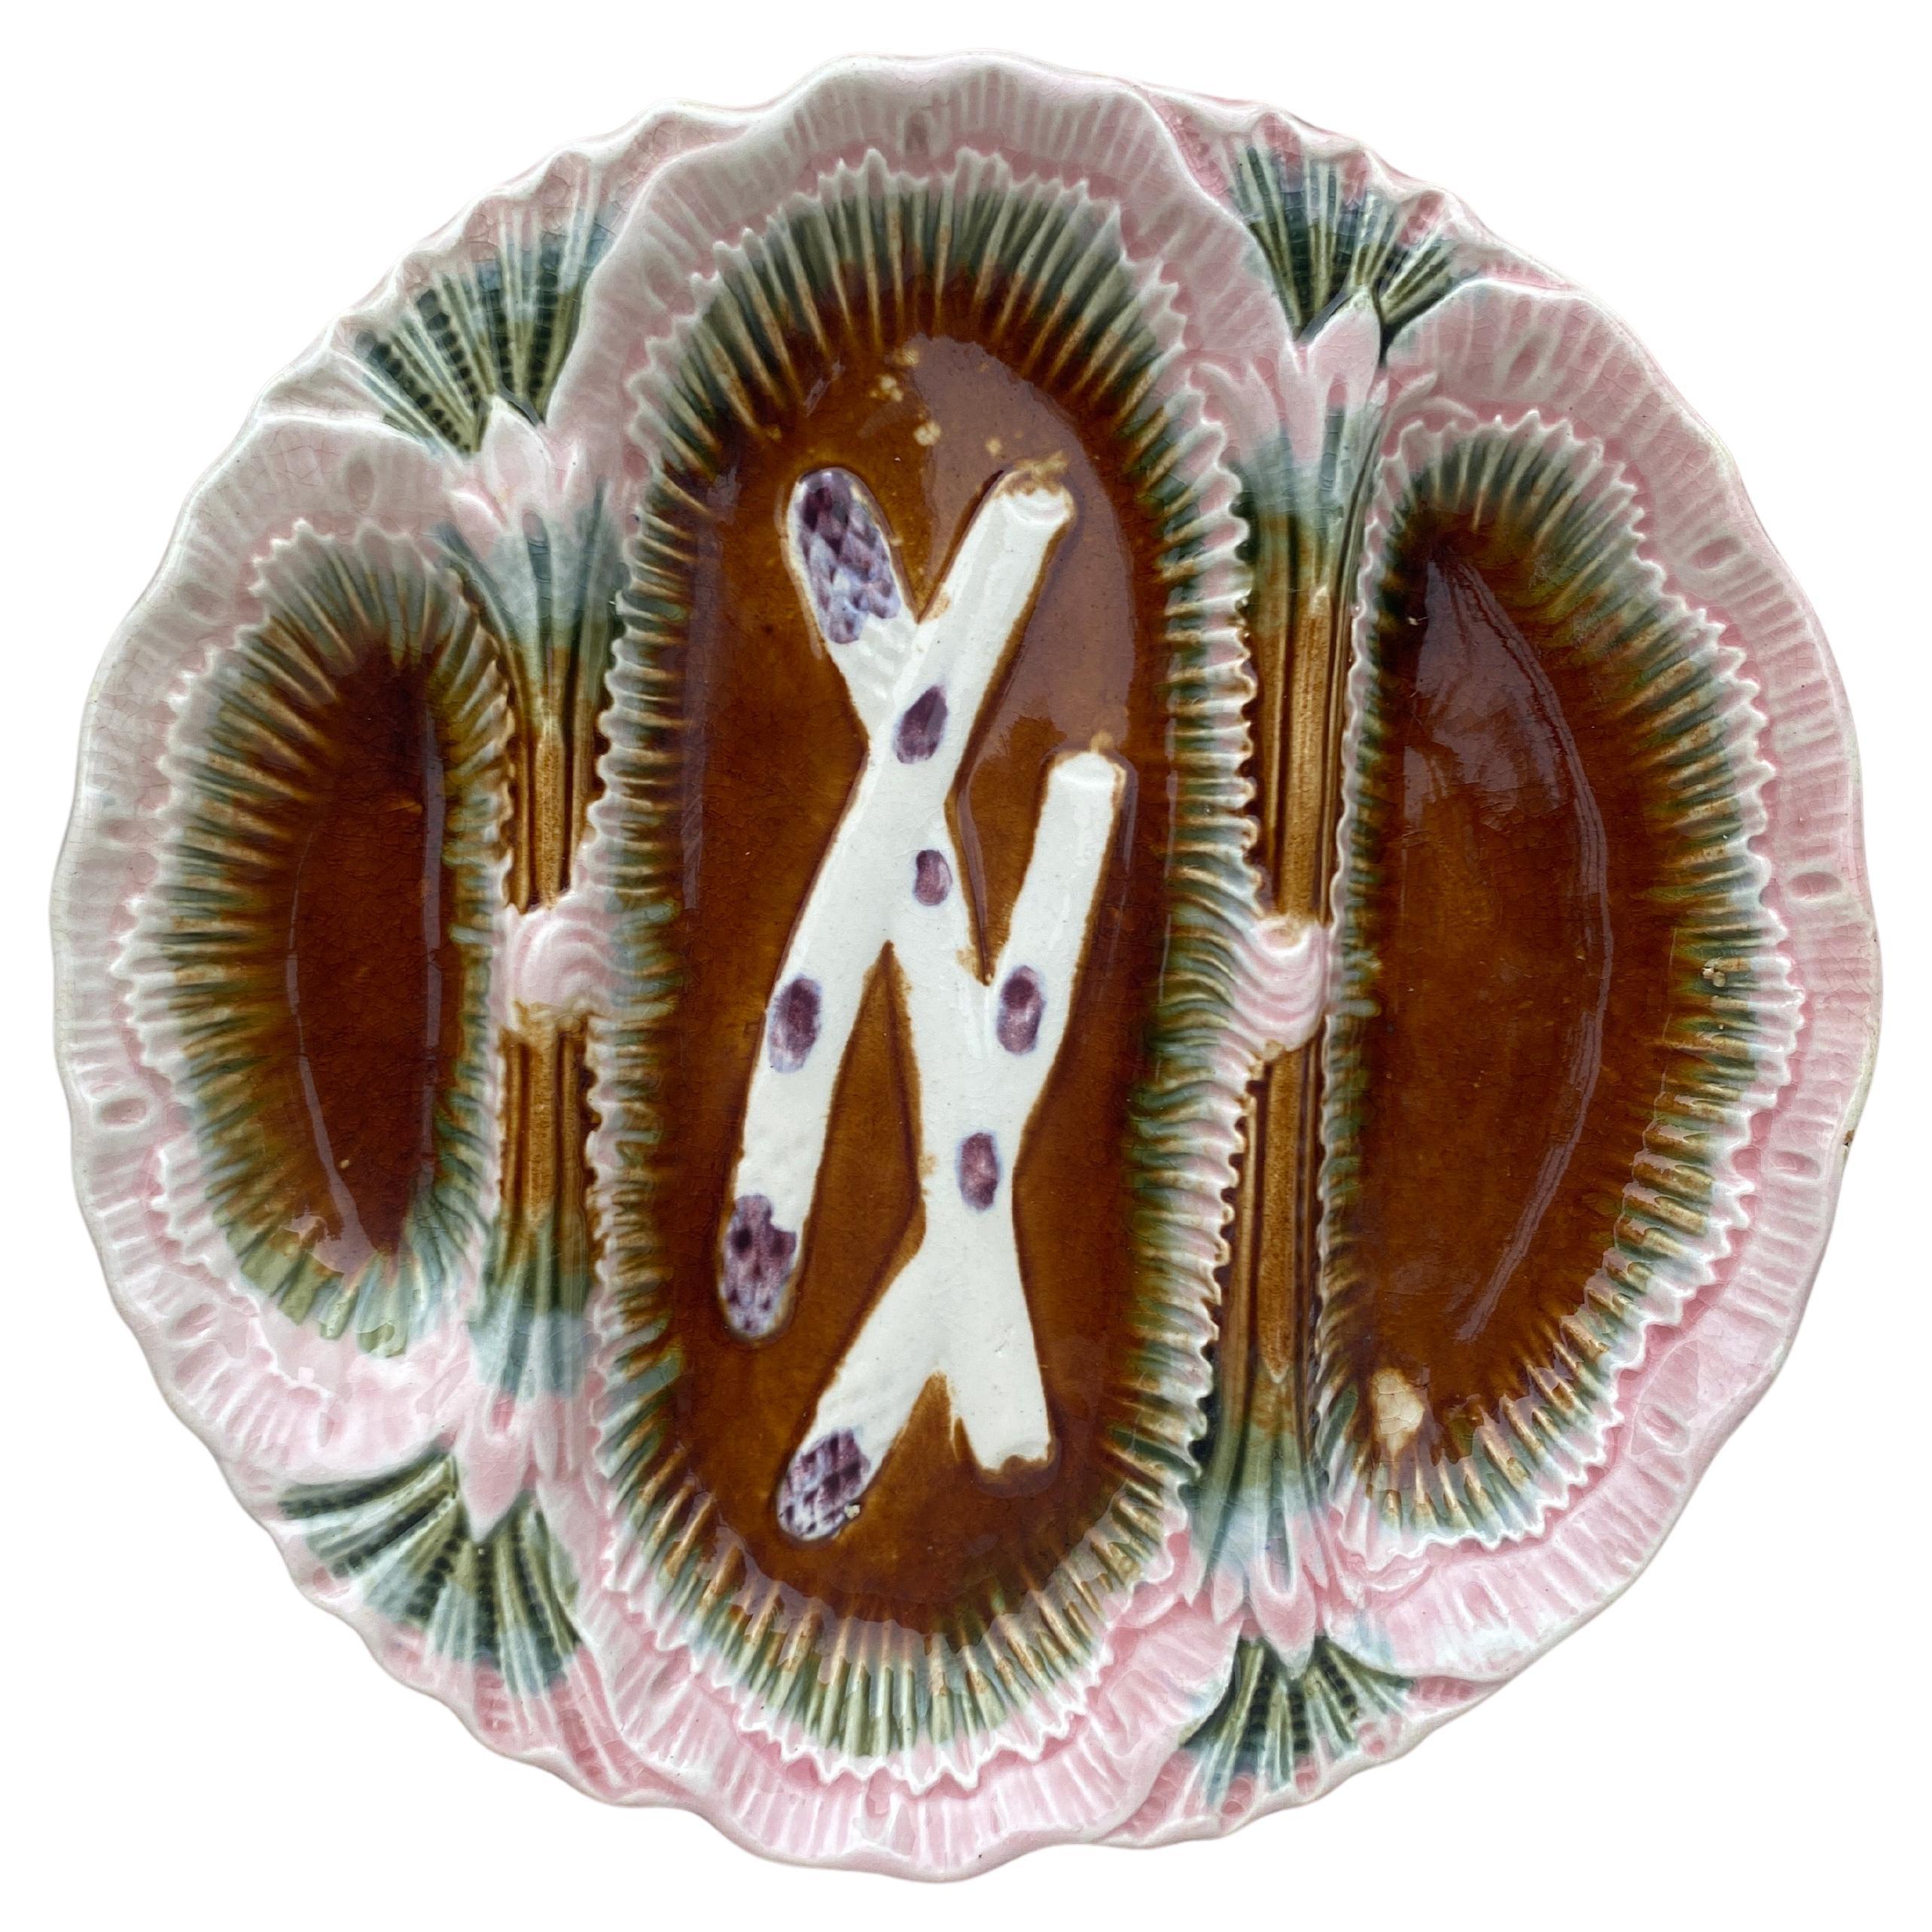 Unusual French Majolica asparagus plate with 3 spaces unsigned, circa 1890.